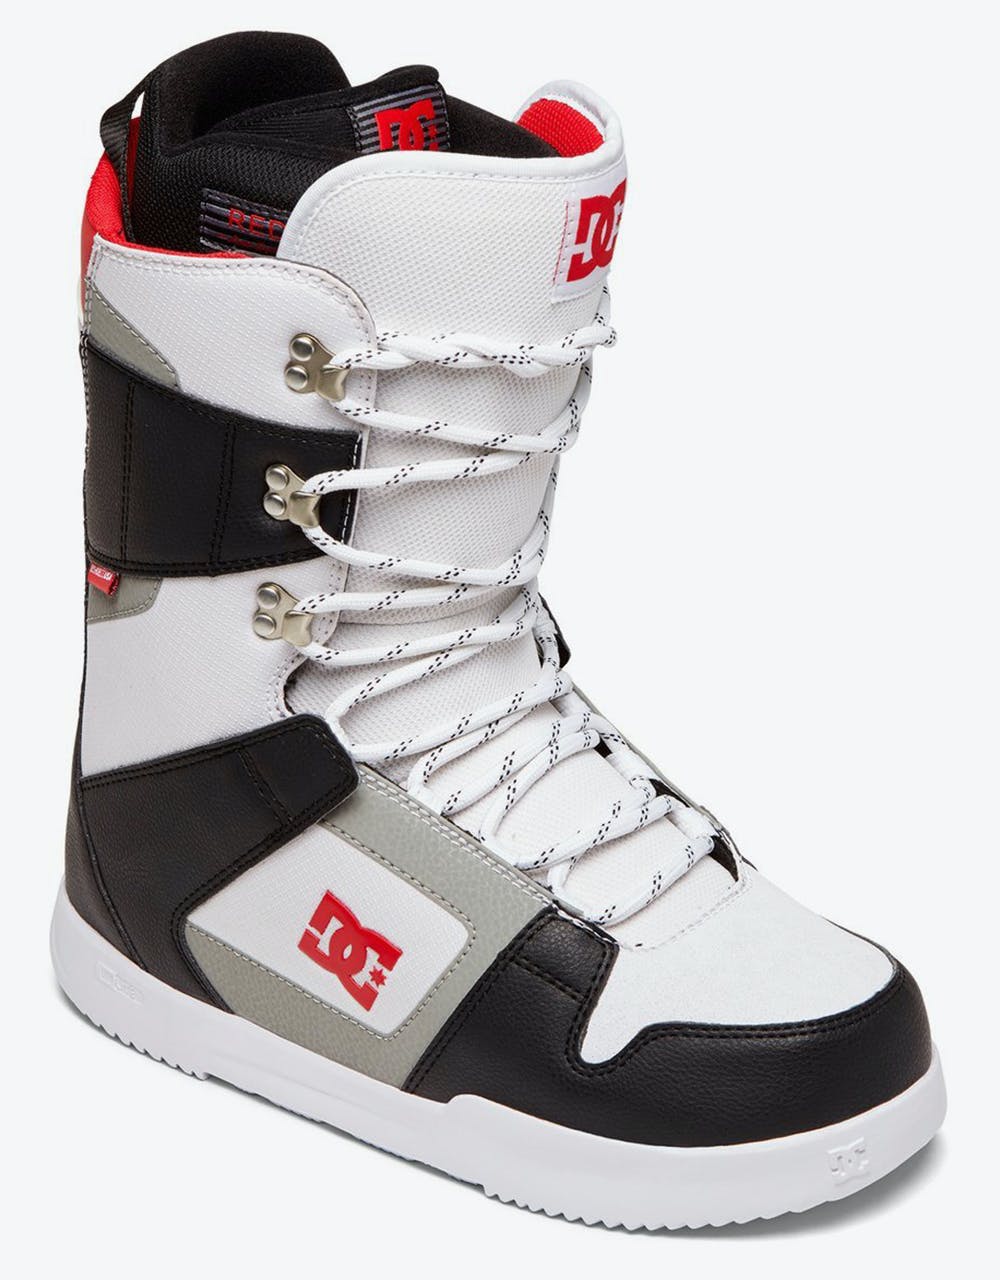 DC Phase 2020 Snowboard Boots - Black/White